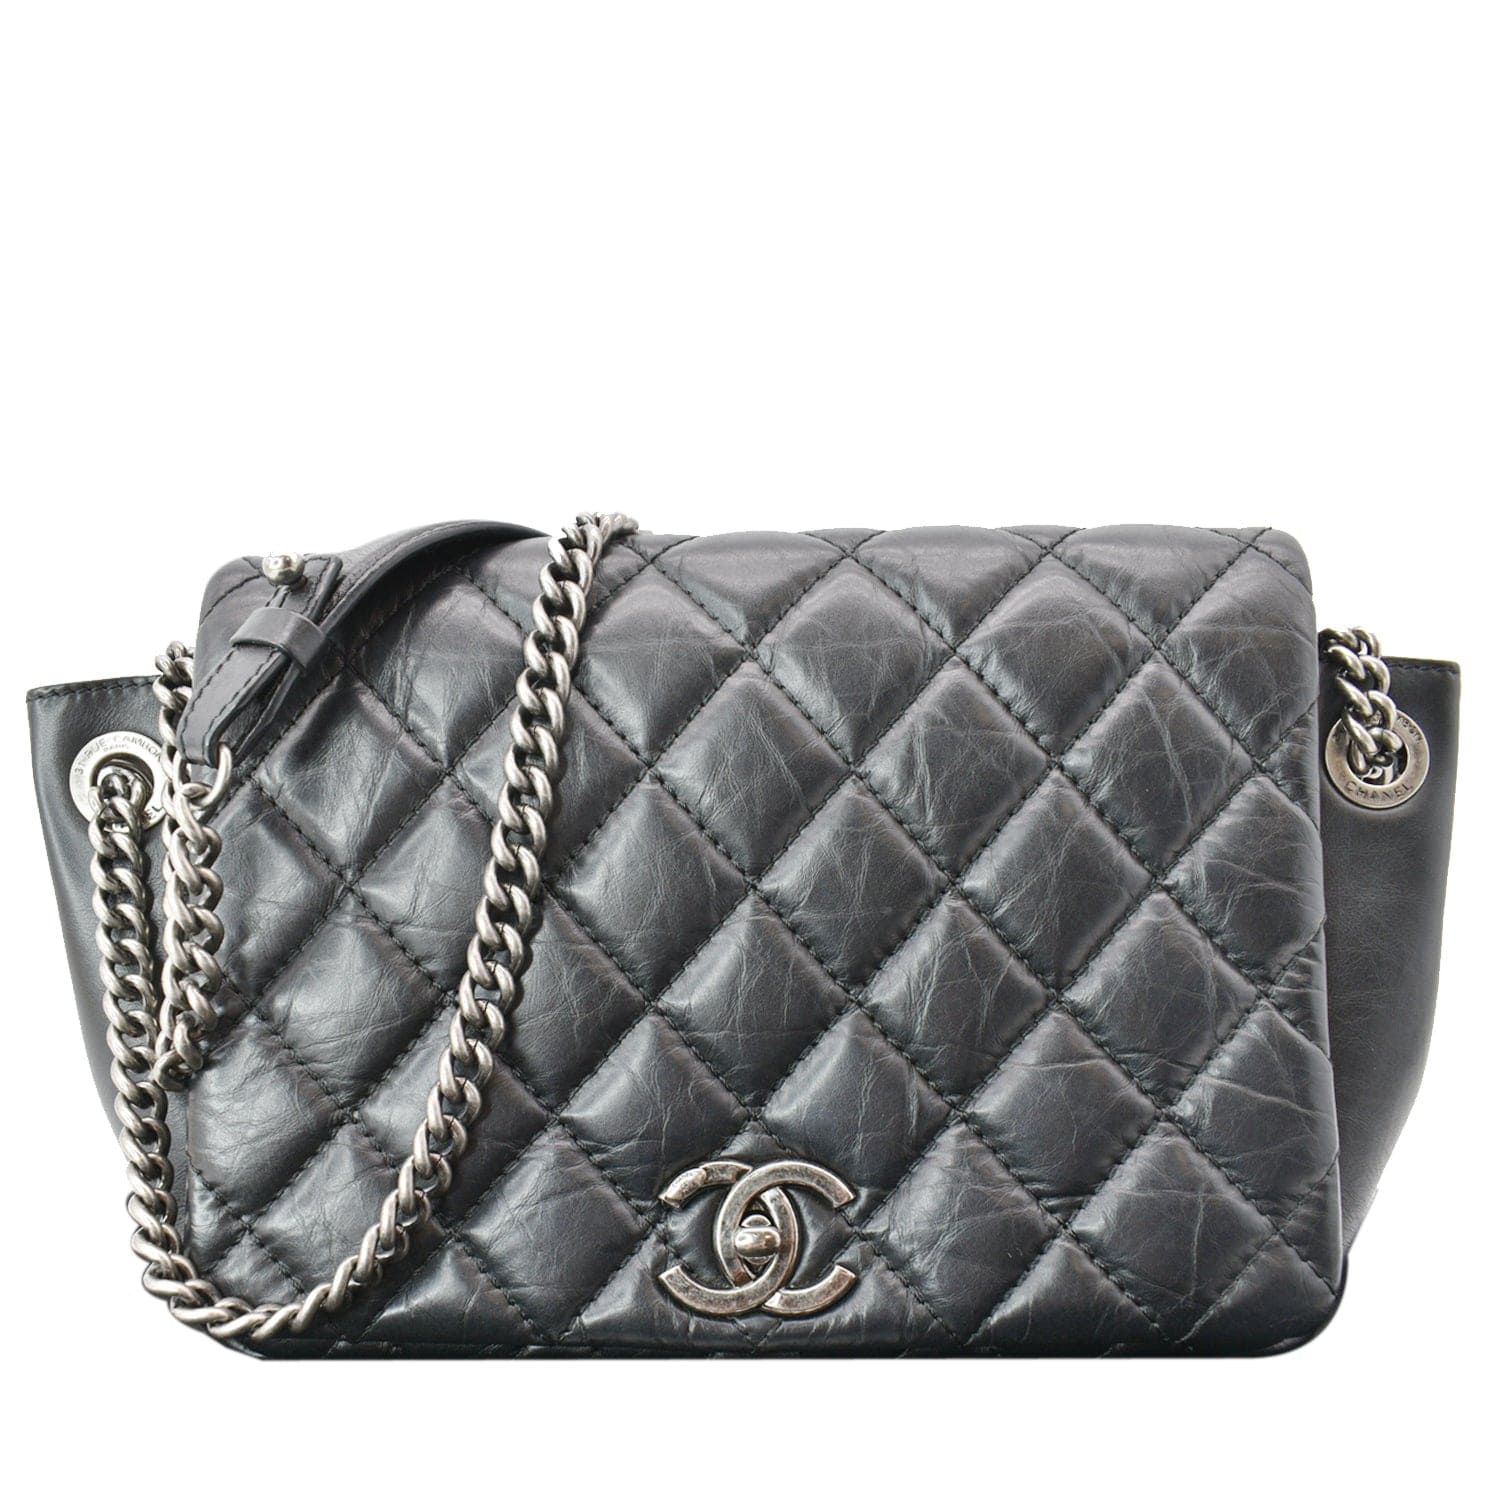 CHANEL Glazed Calfskin Quilted Large CC Enchained Accordion Flap